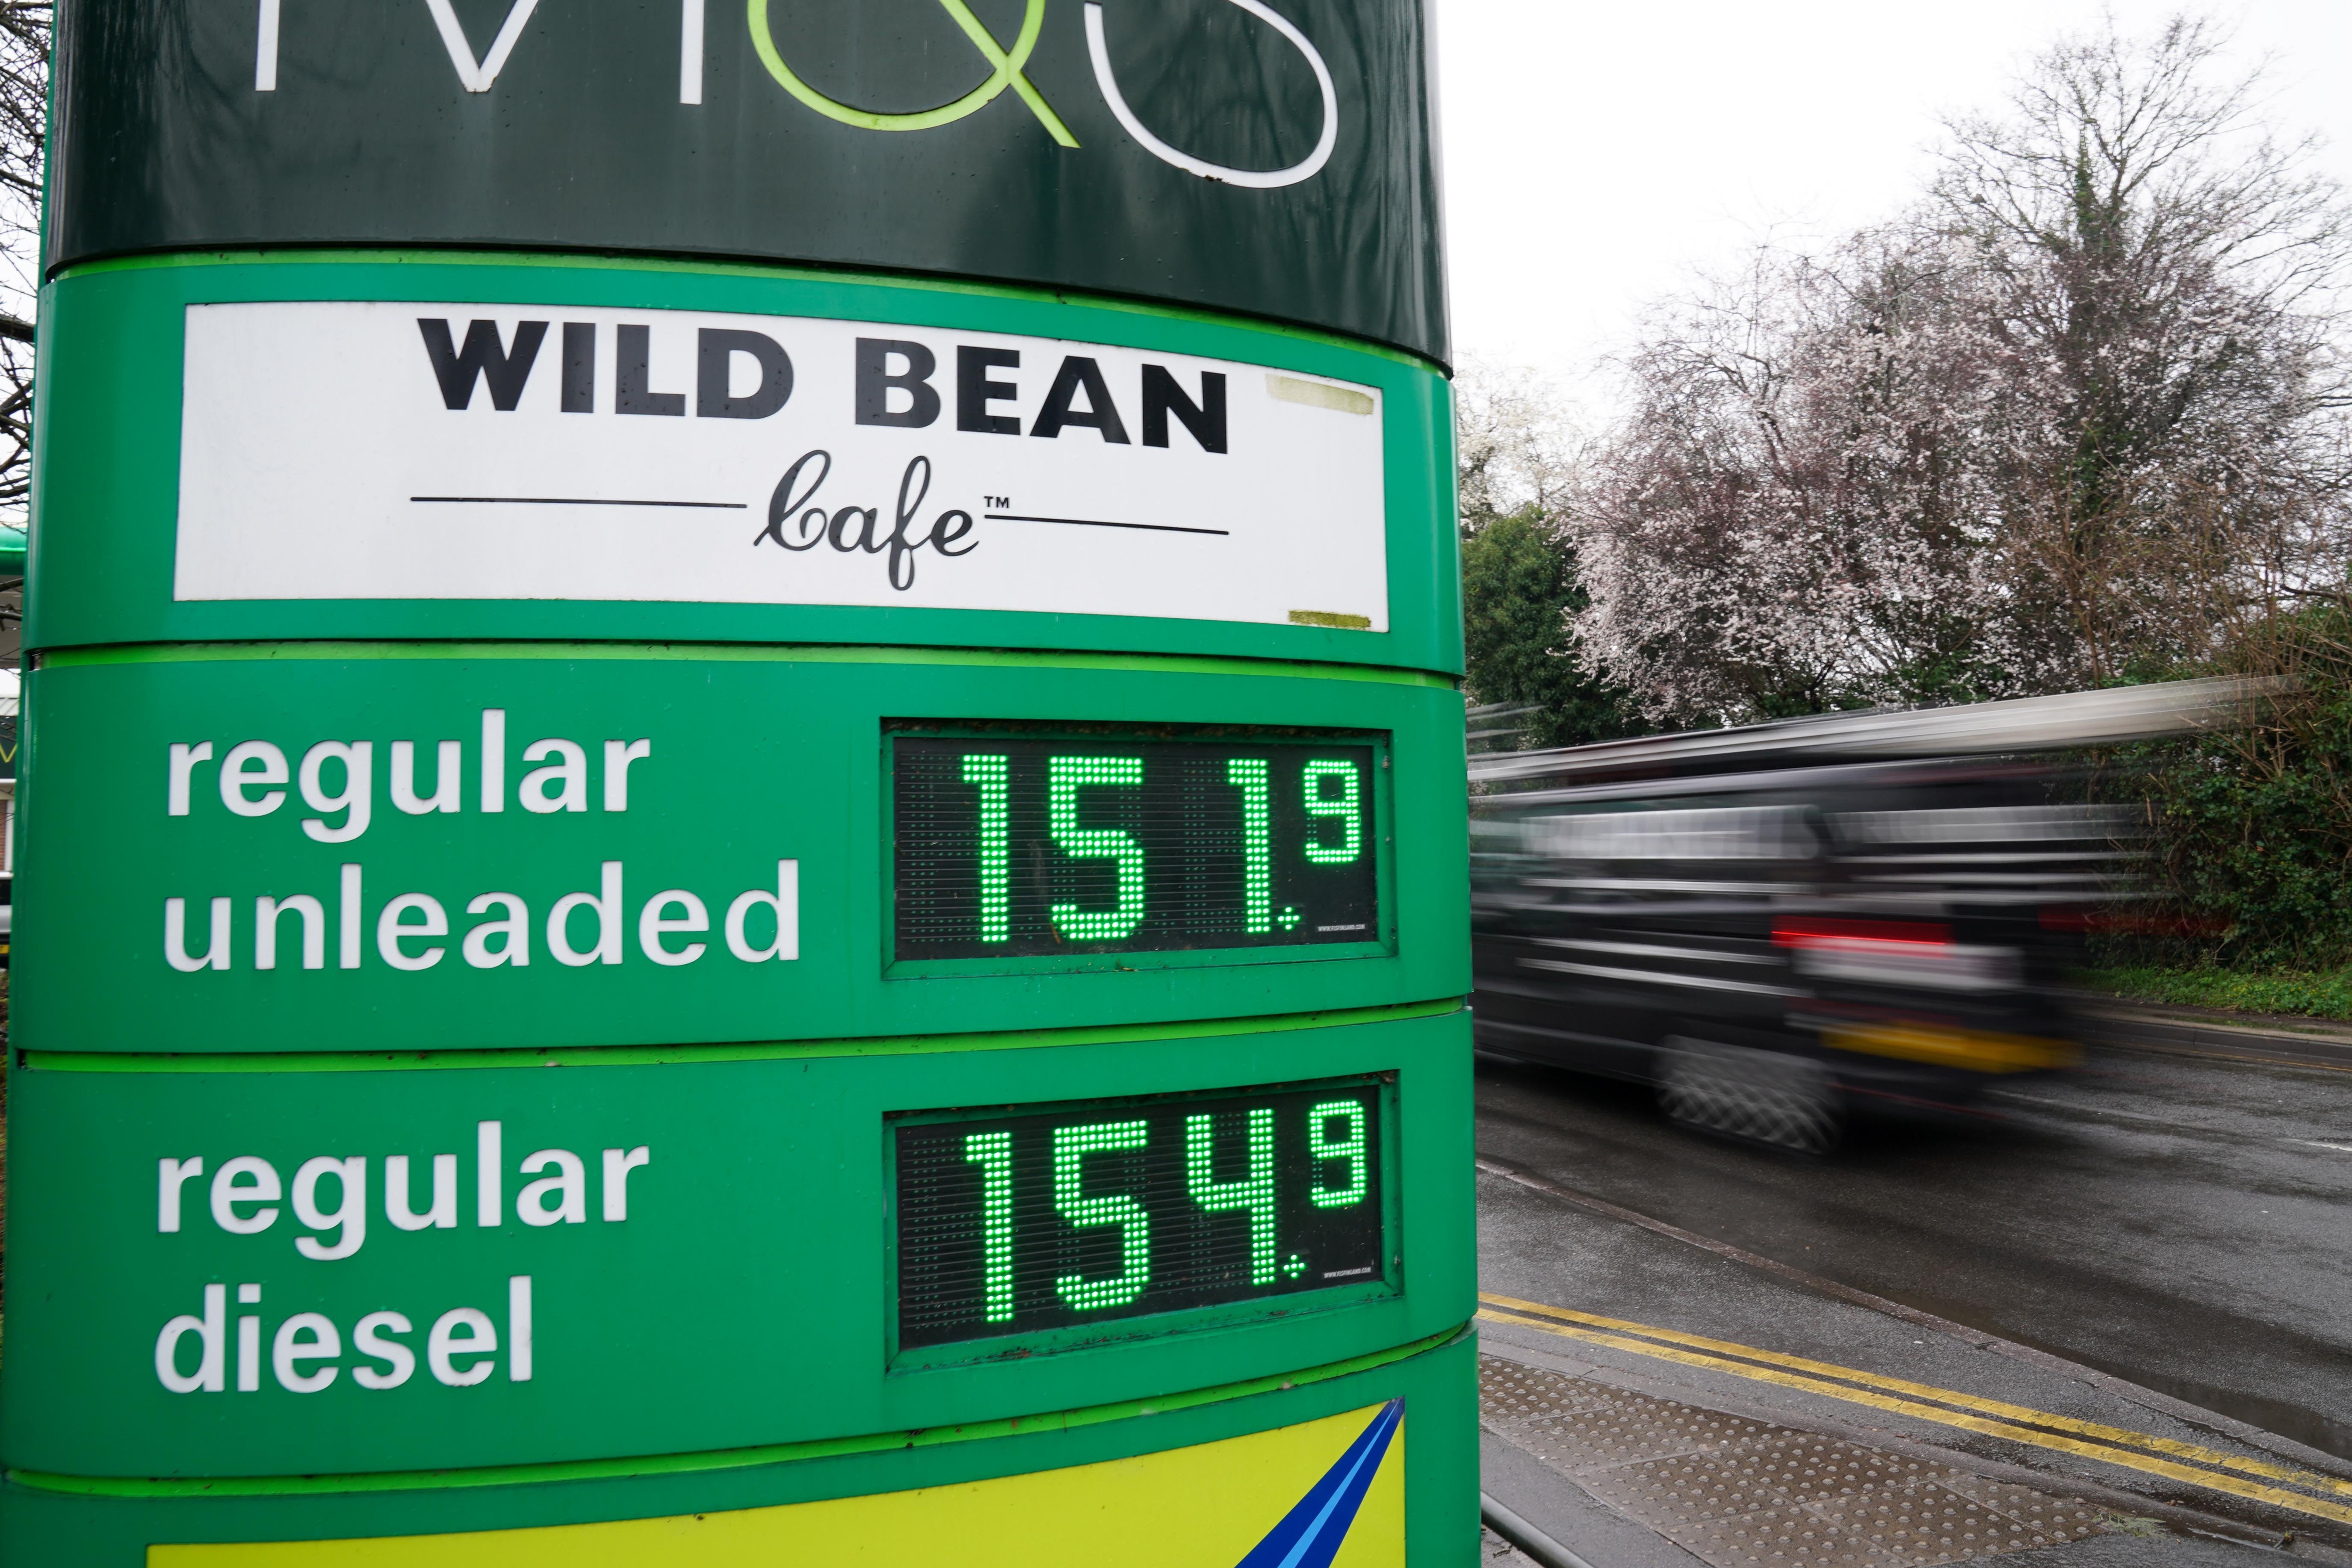 Fuel prices displayed at a BP petrol station in Warwick (PA)